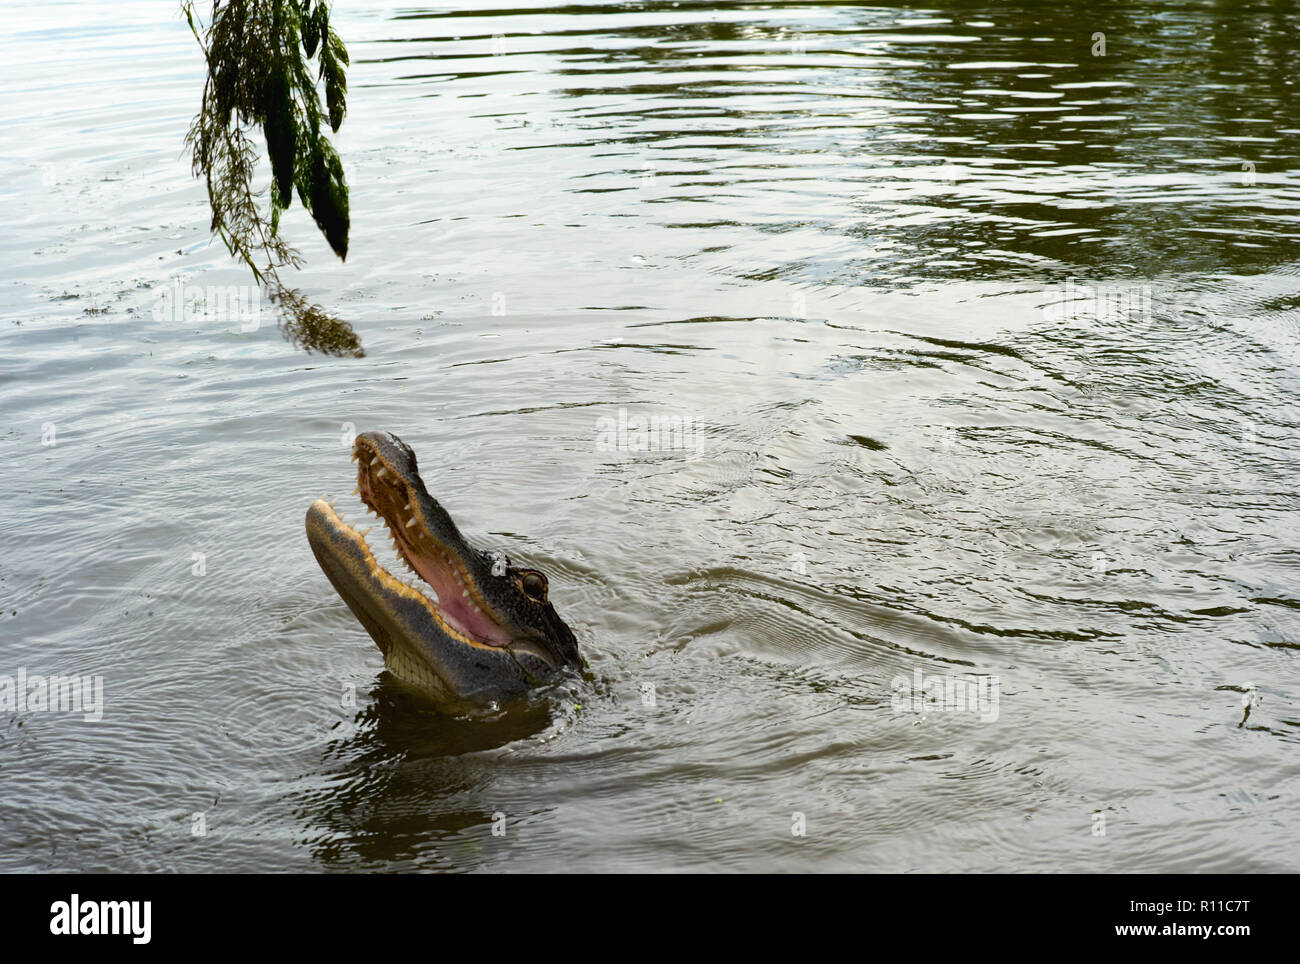 Alligator Head above the Water of a Bayou Snatching at Something Stock Photo